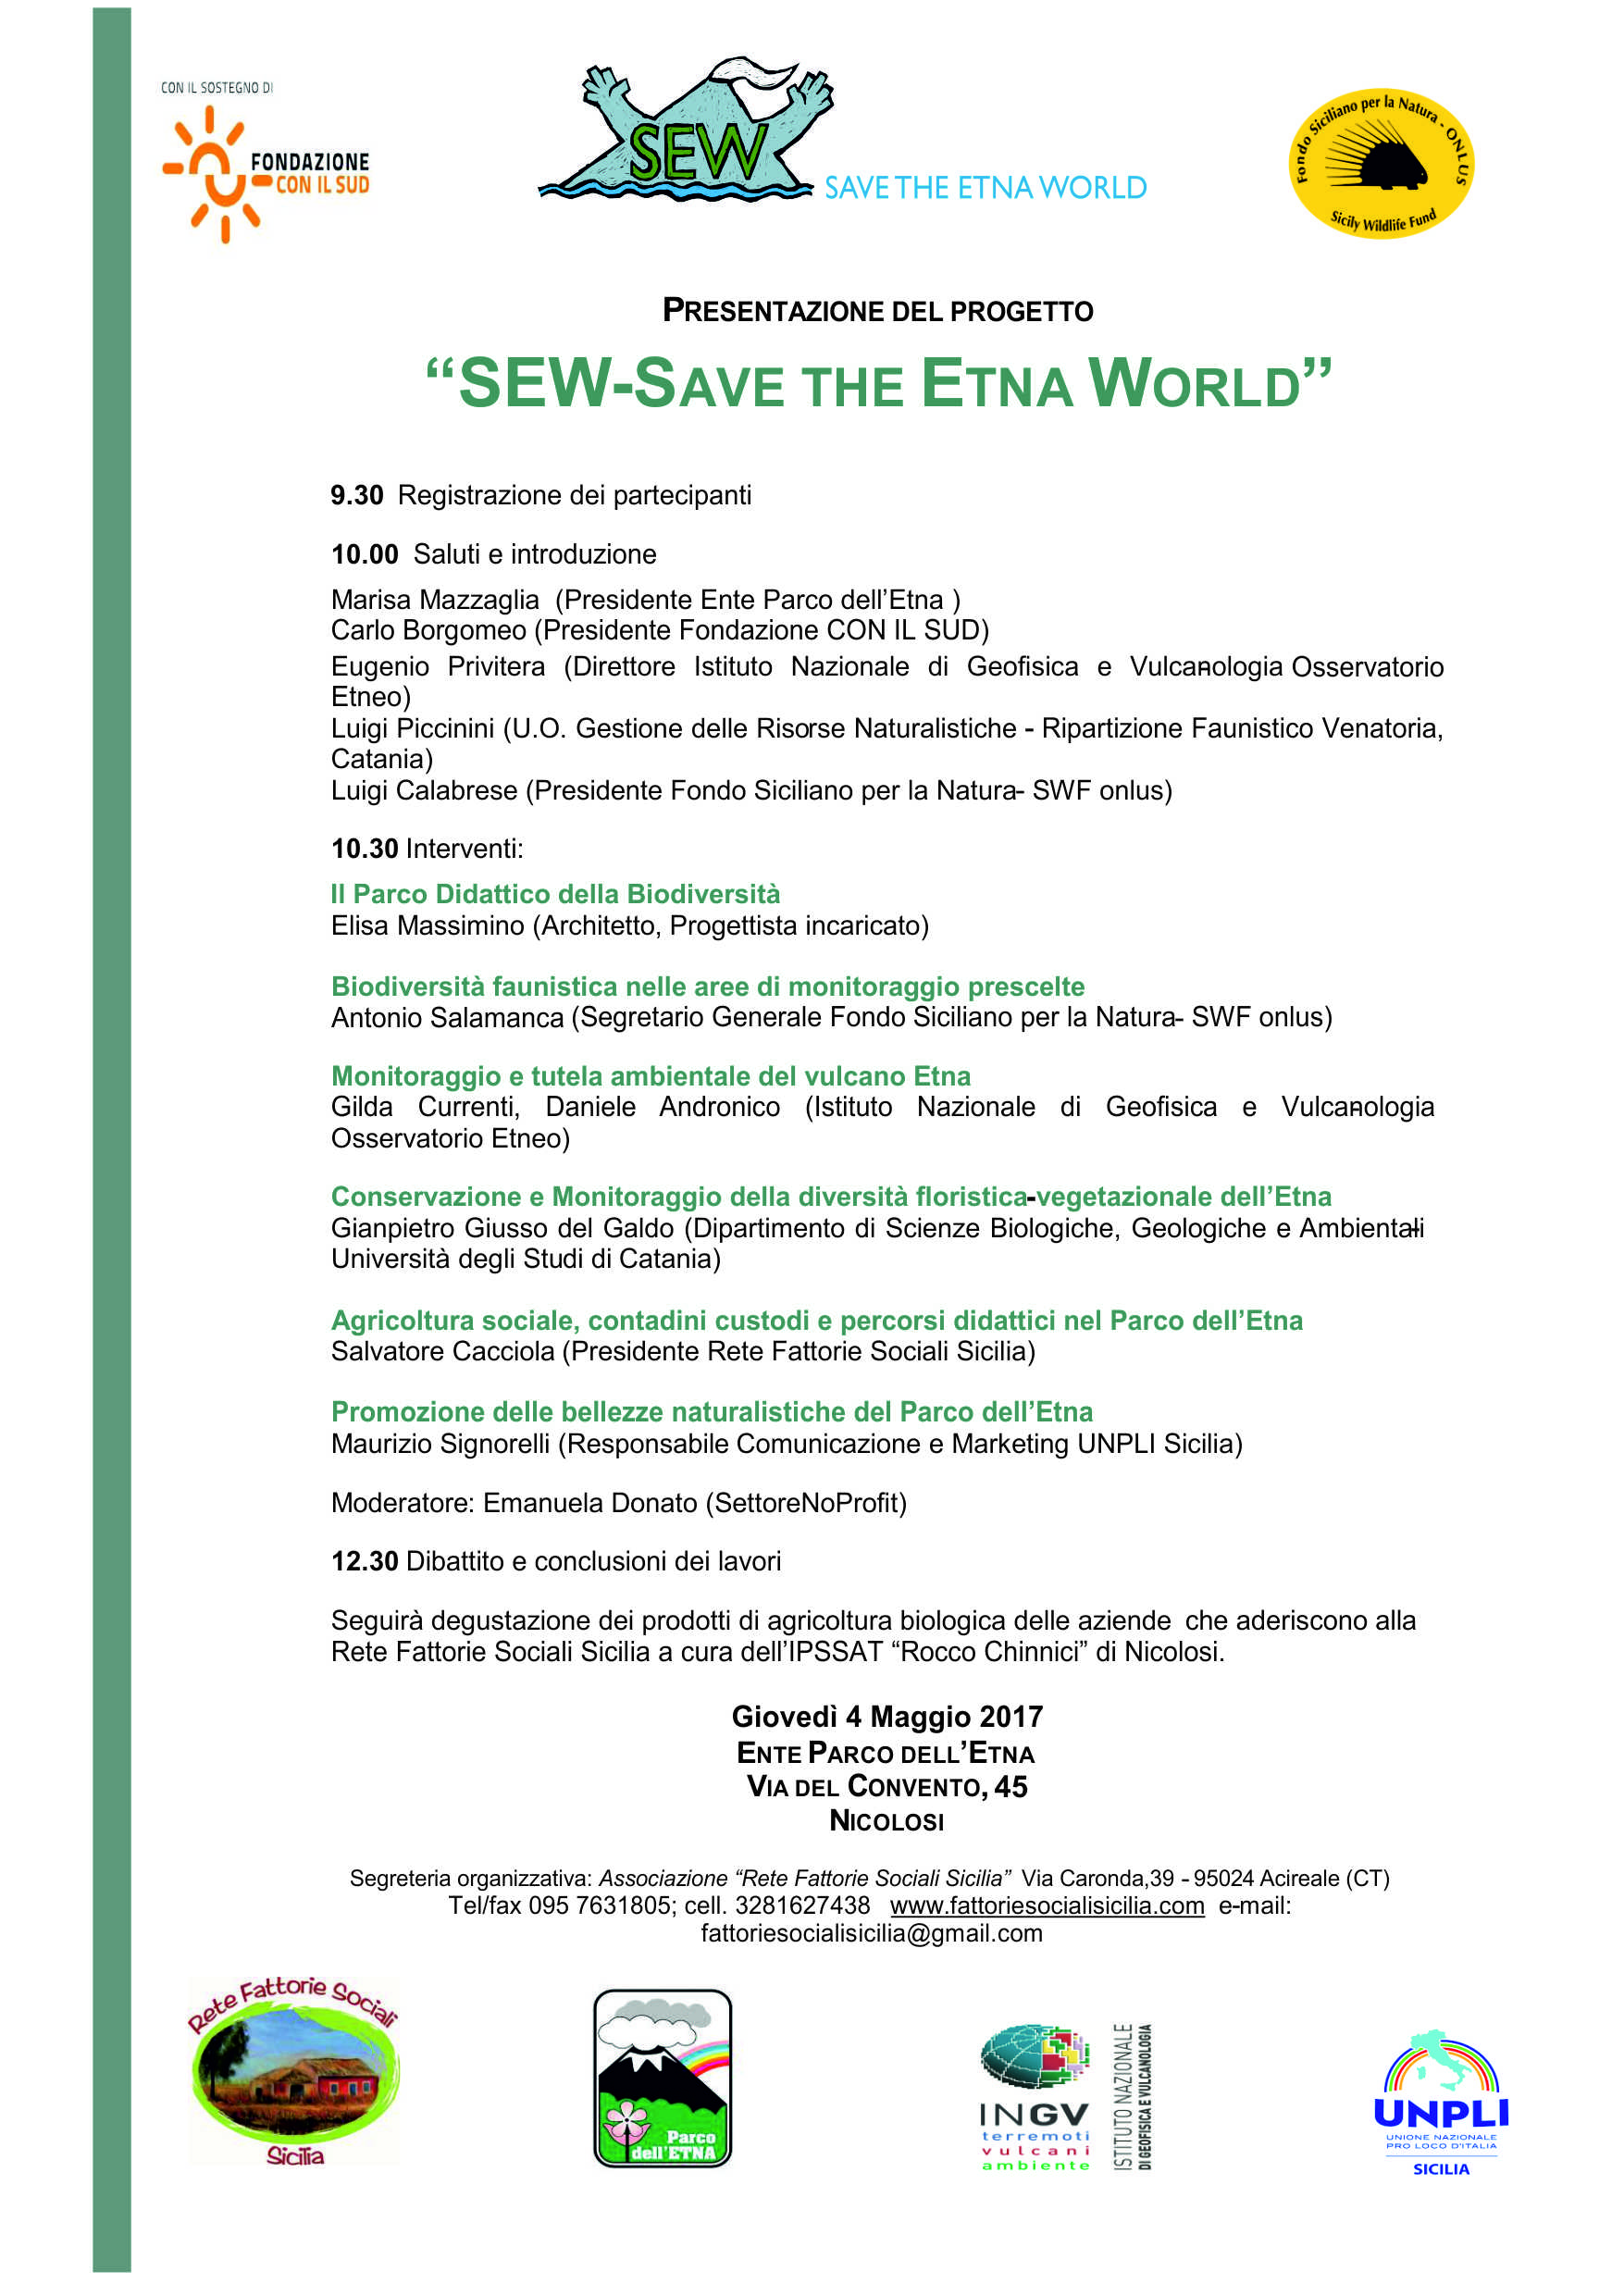 SEW-Save the Etna World